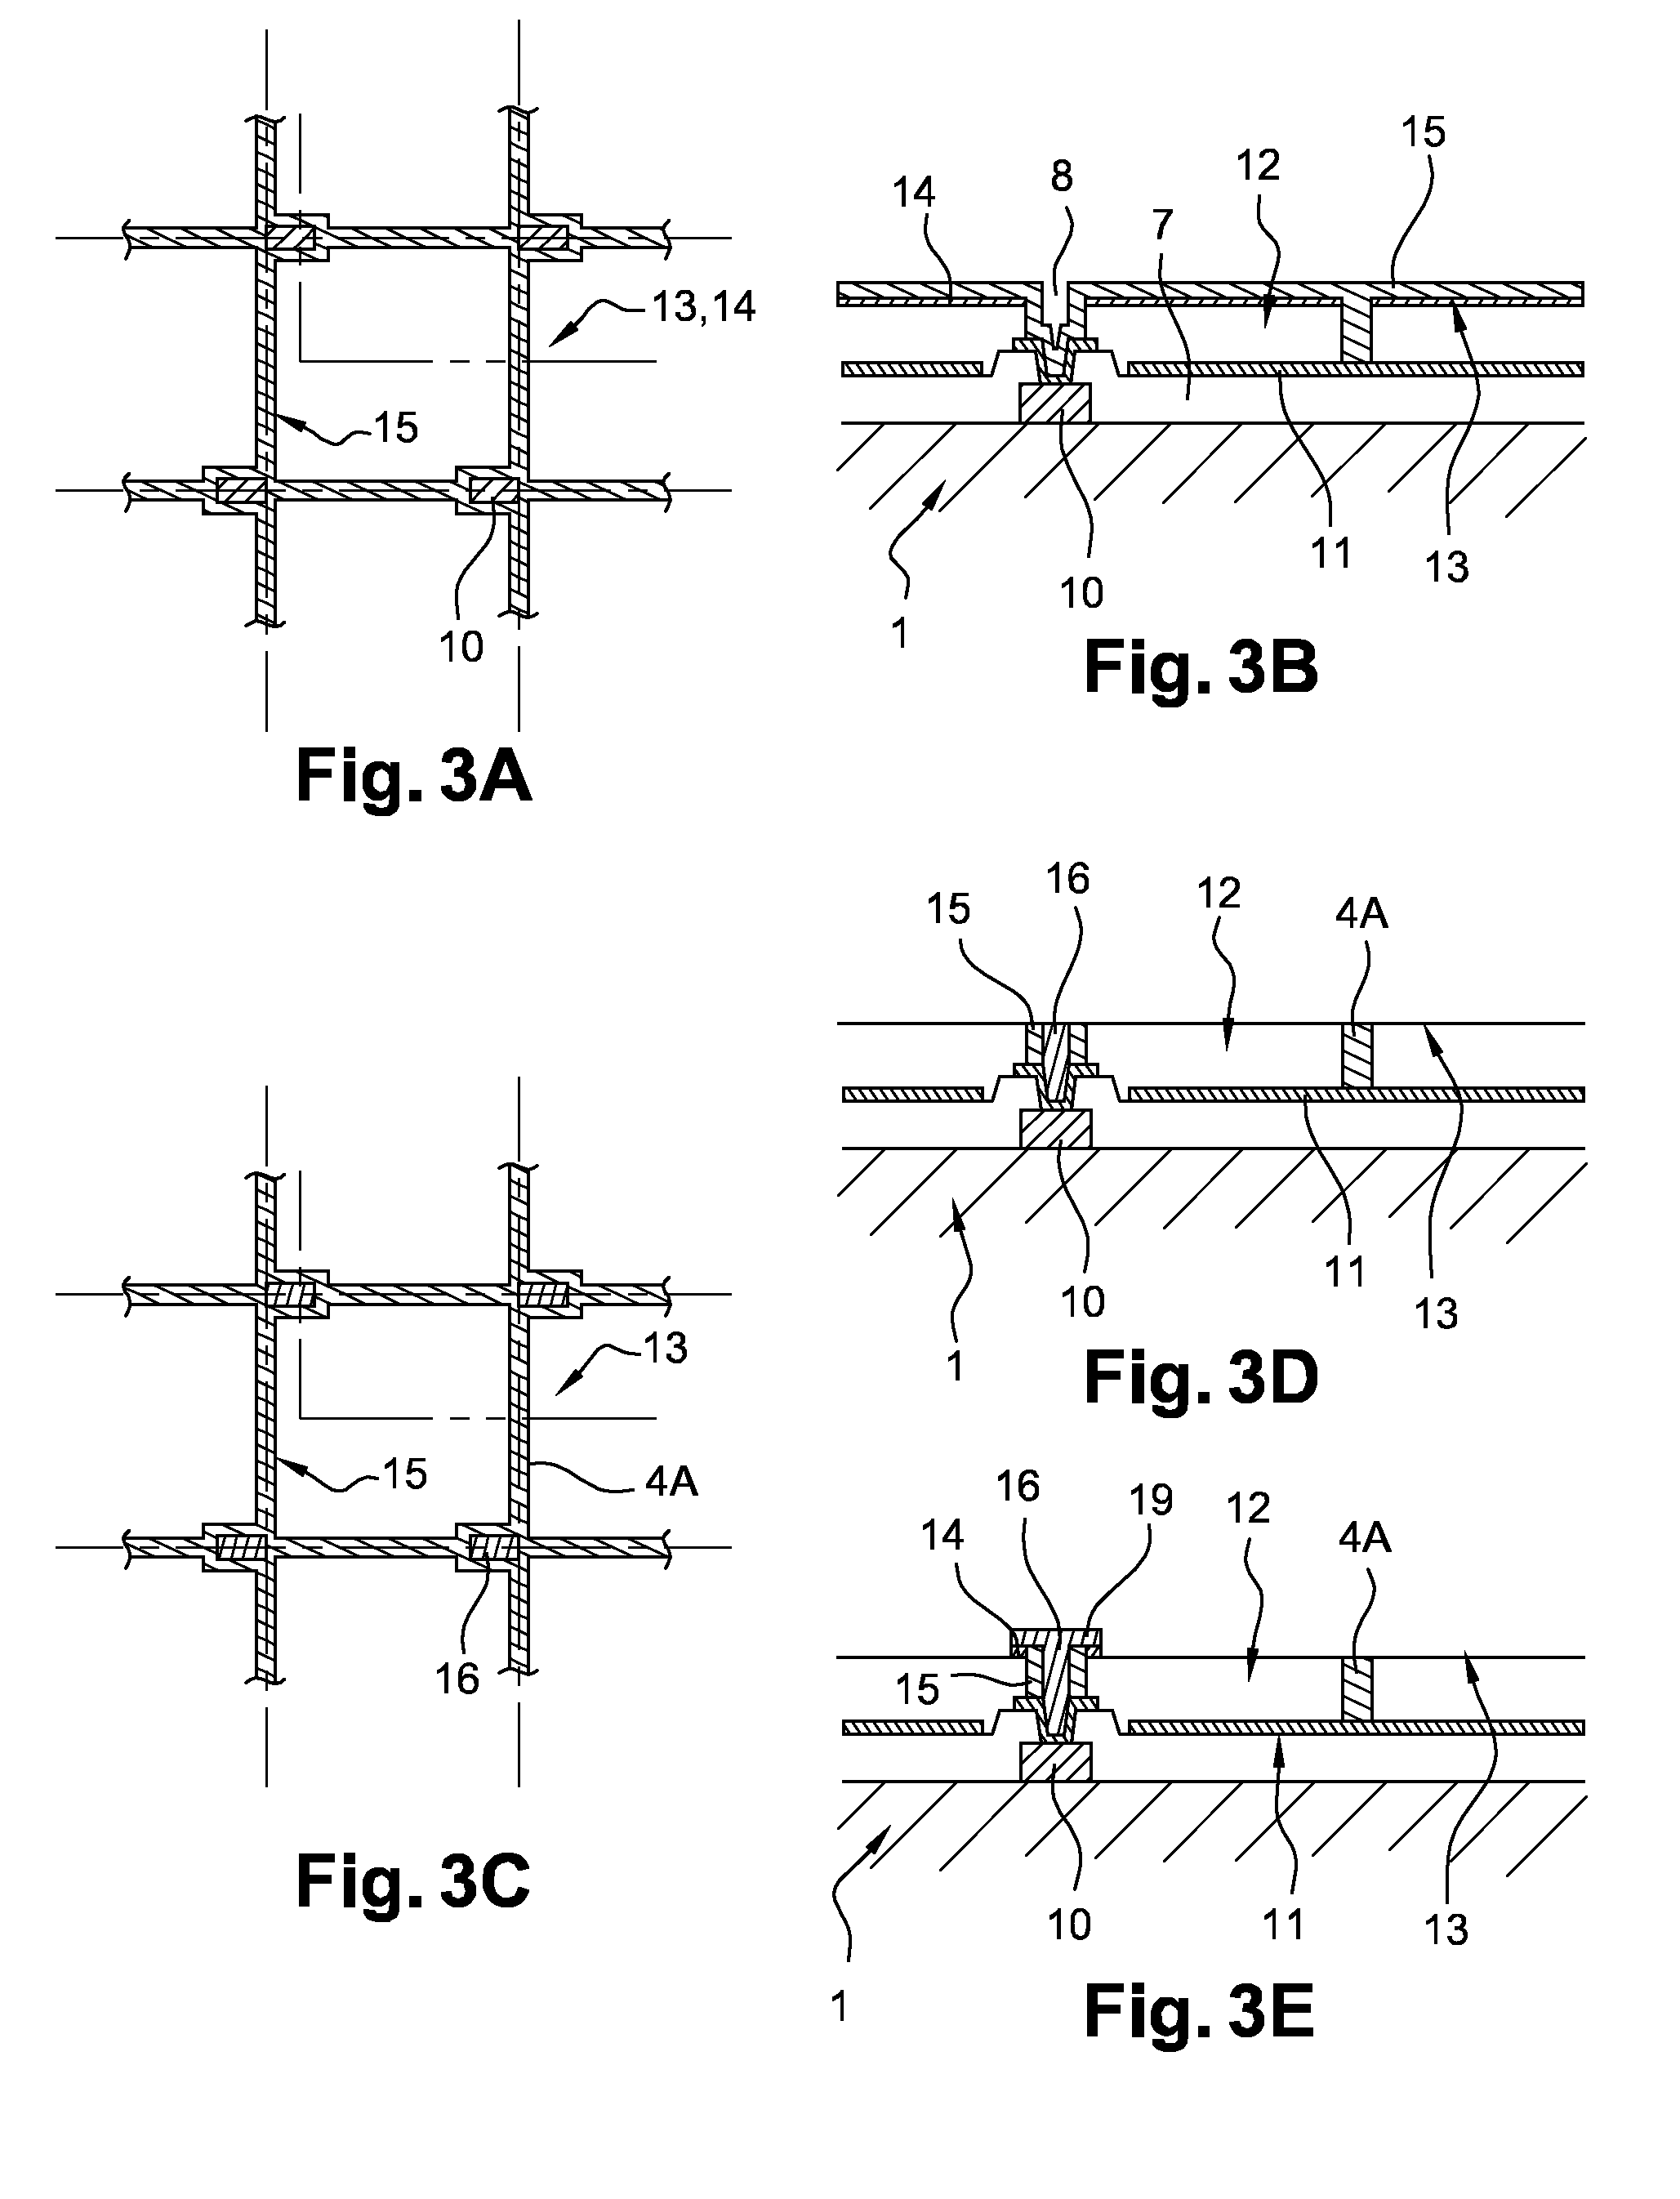 Electromagnetic radiation detector with micro-encapsulation, and device for detecting electromagnetic radiation using such detectors